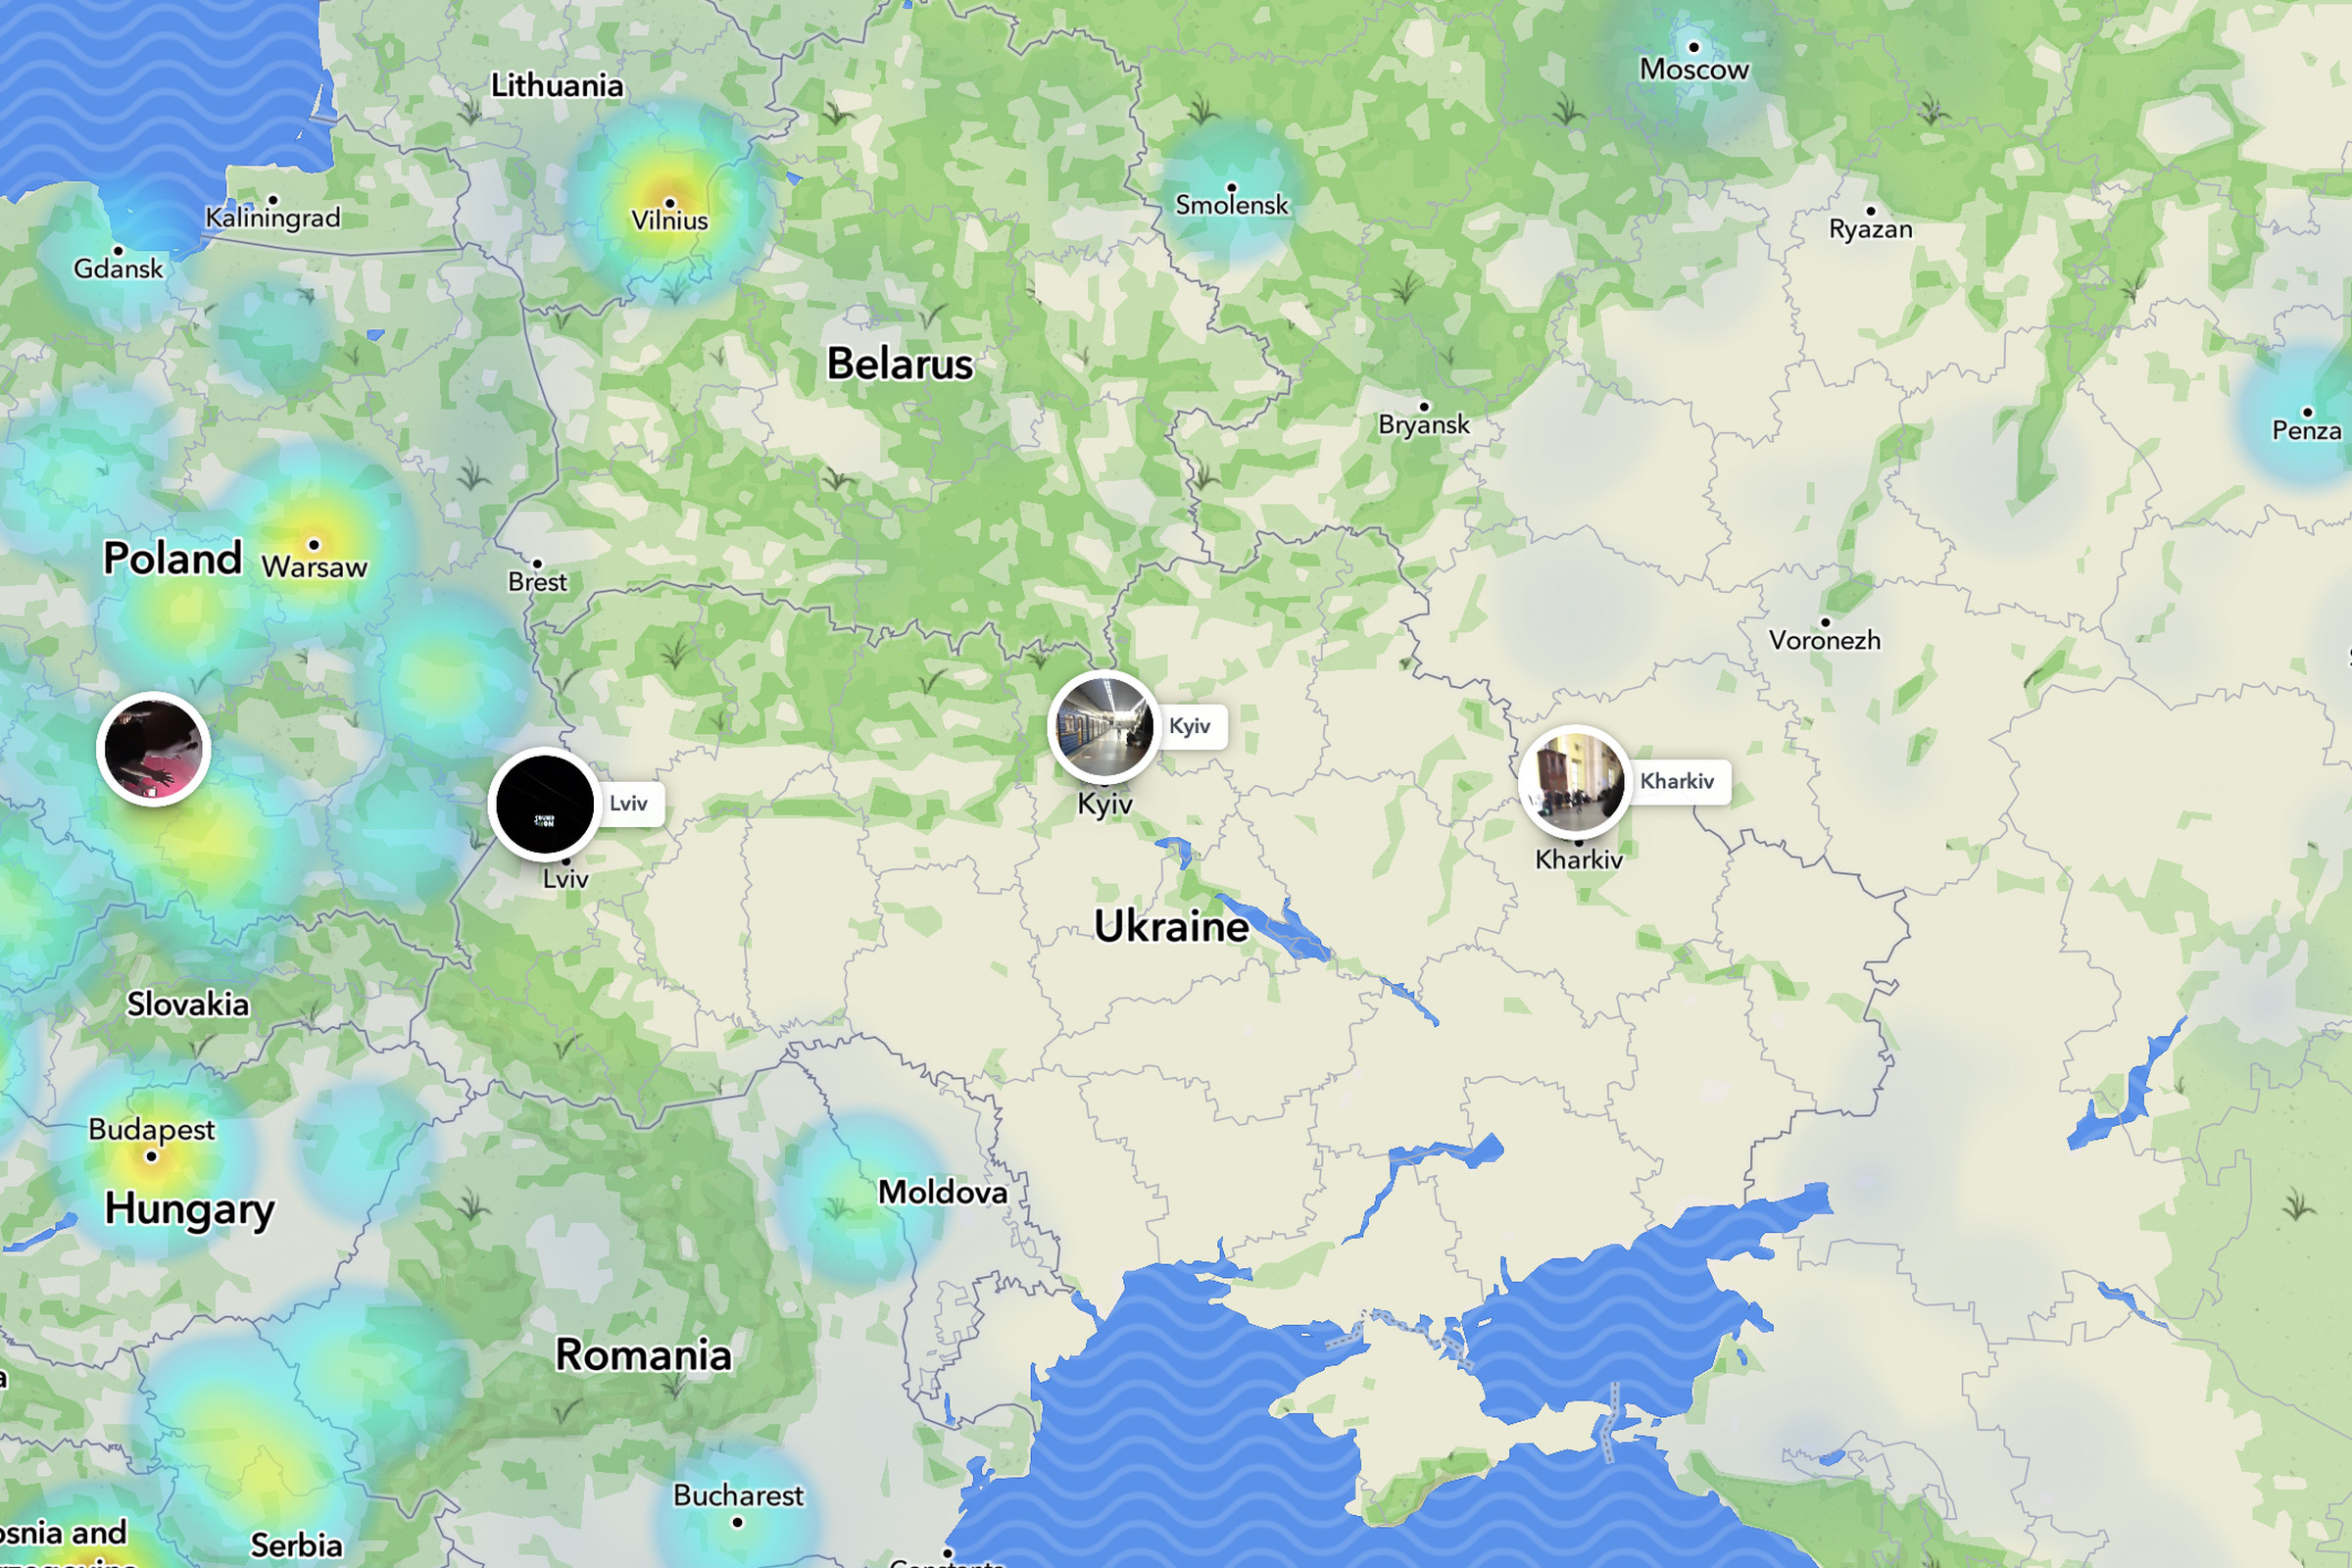 The heatmap shows how many people are submitting snaps in an area.